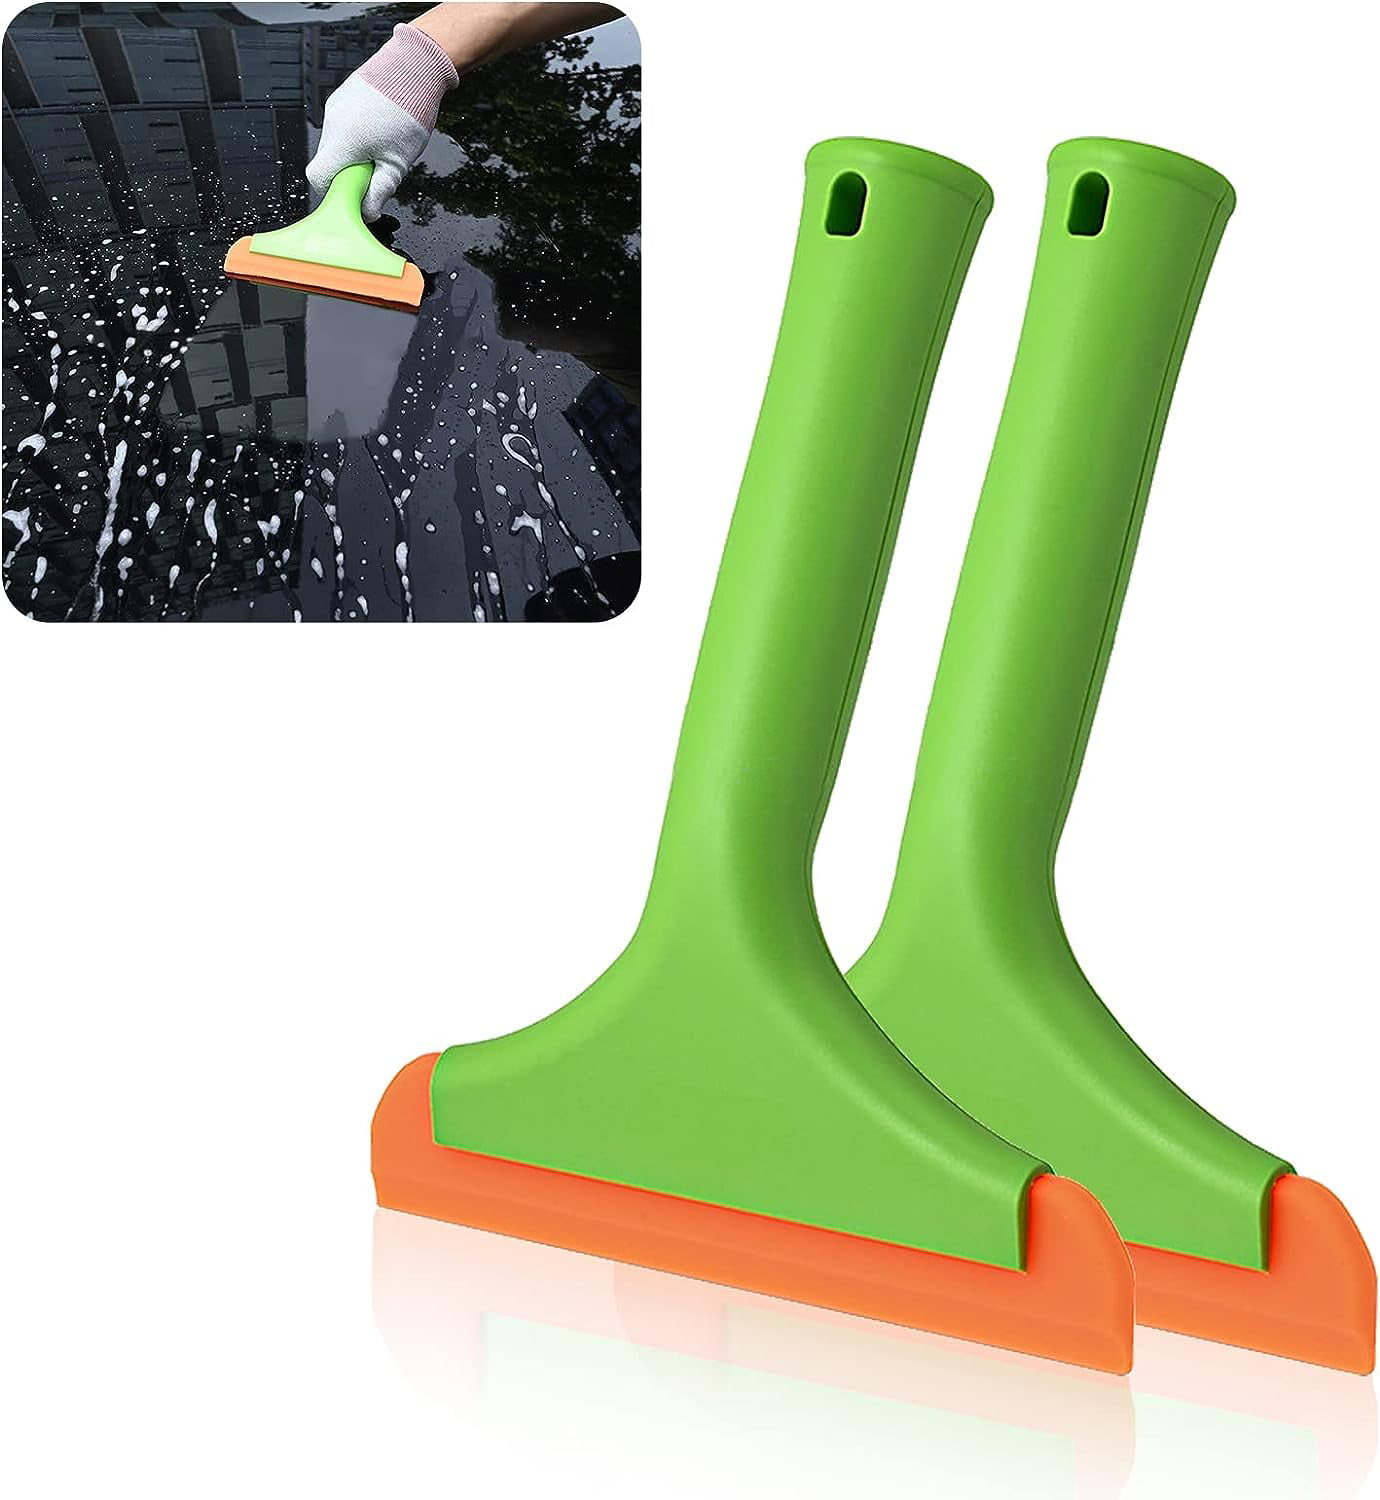  JULY HOME Premium All-Purpose Silicone Squeegee 11